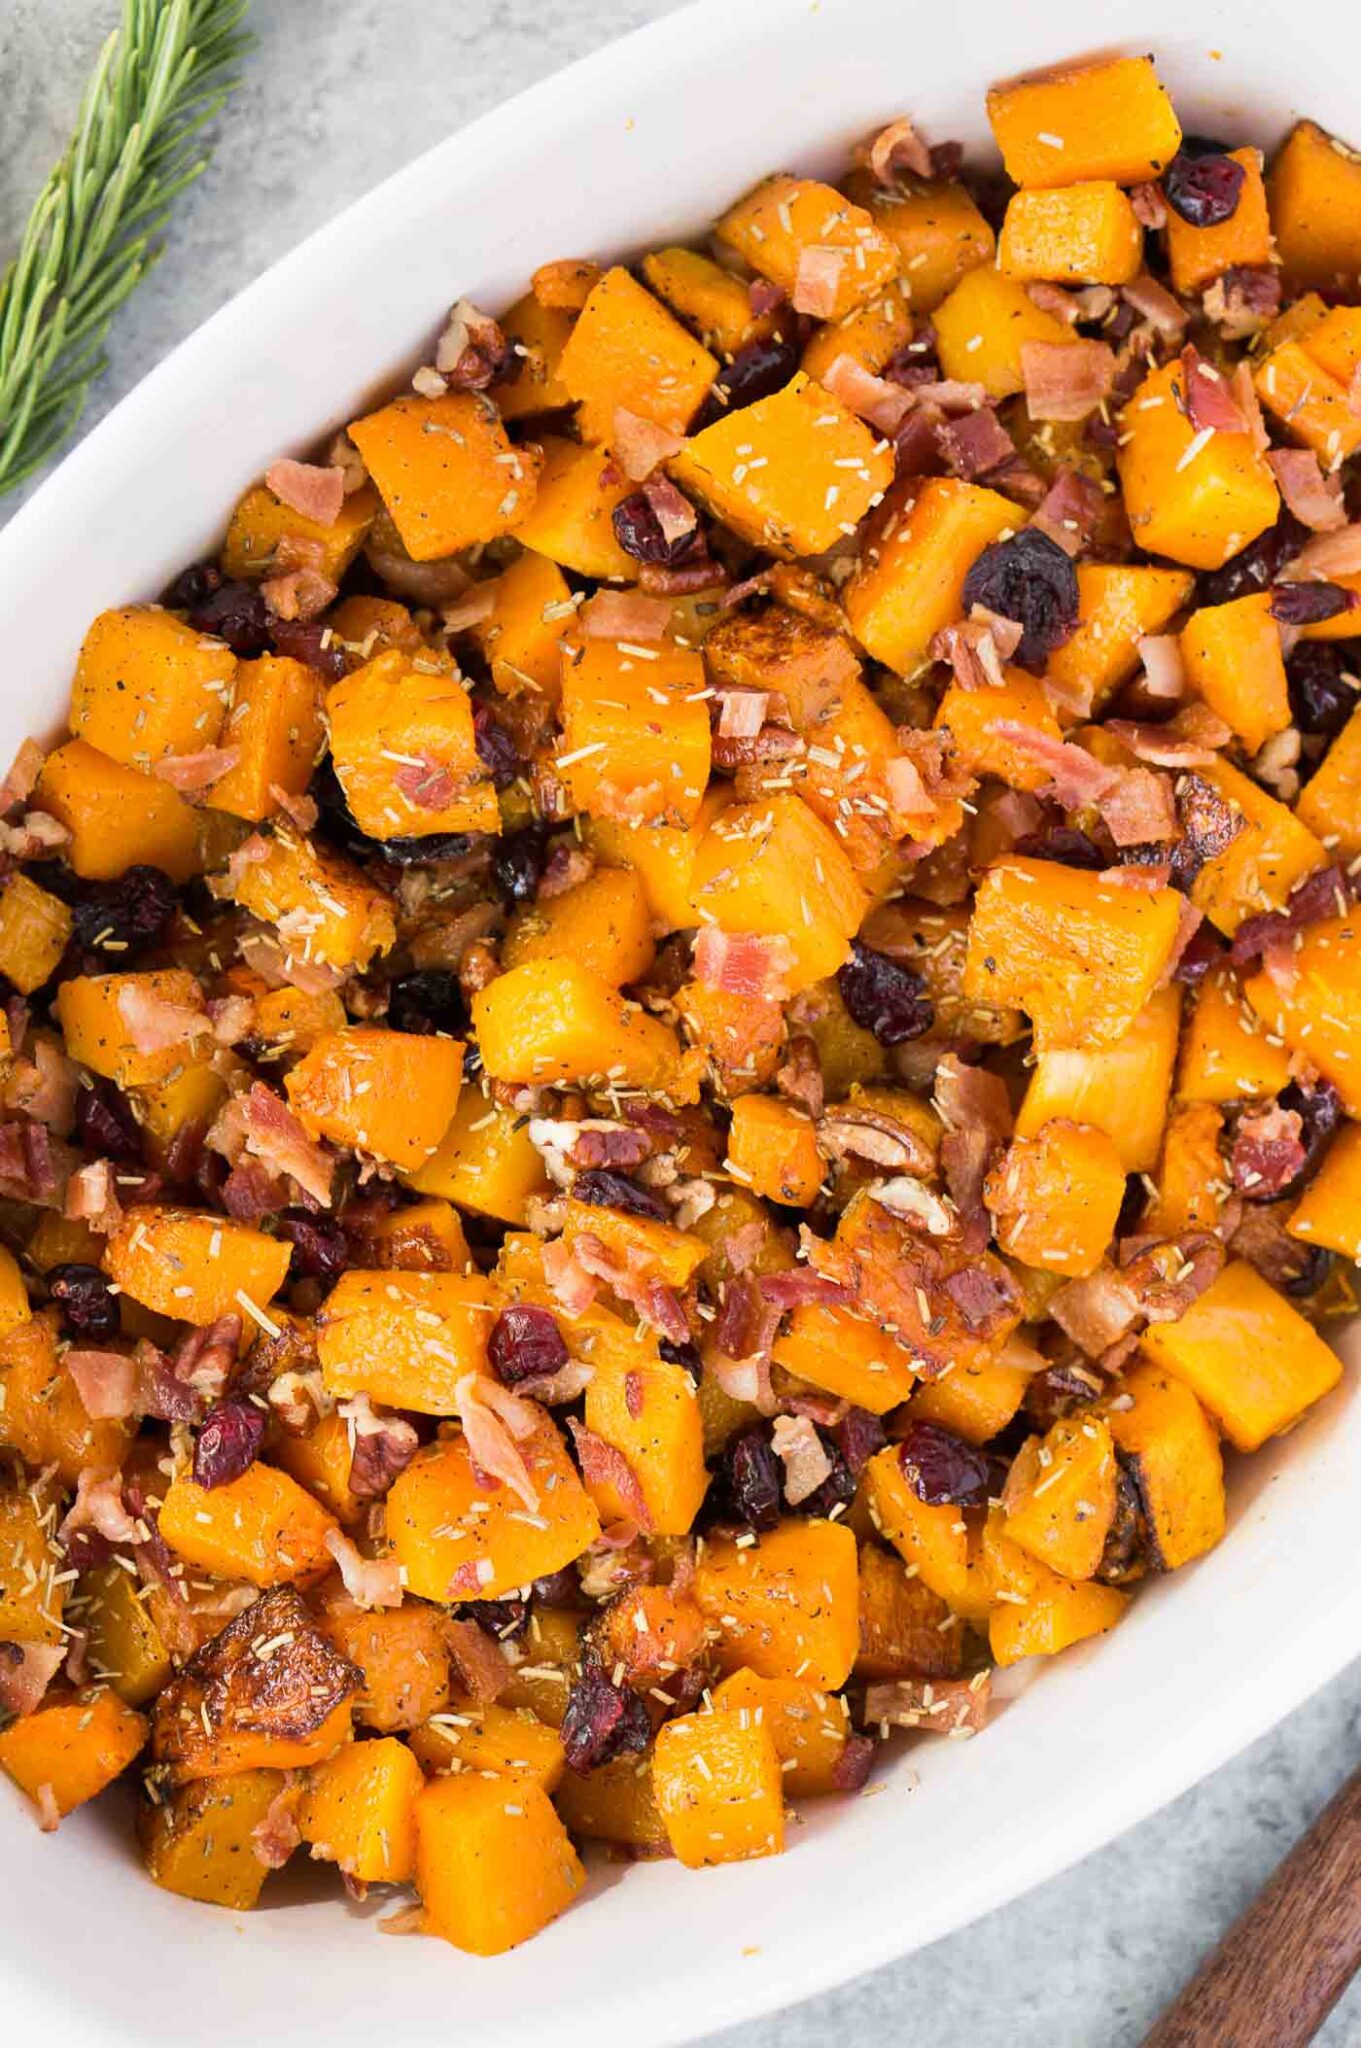 cubed and roasted butternut squash with bacon and pecans in a casserole dish